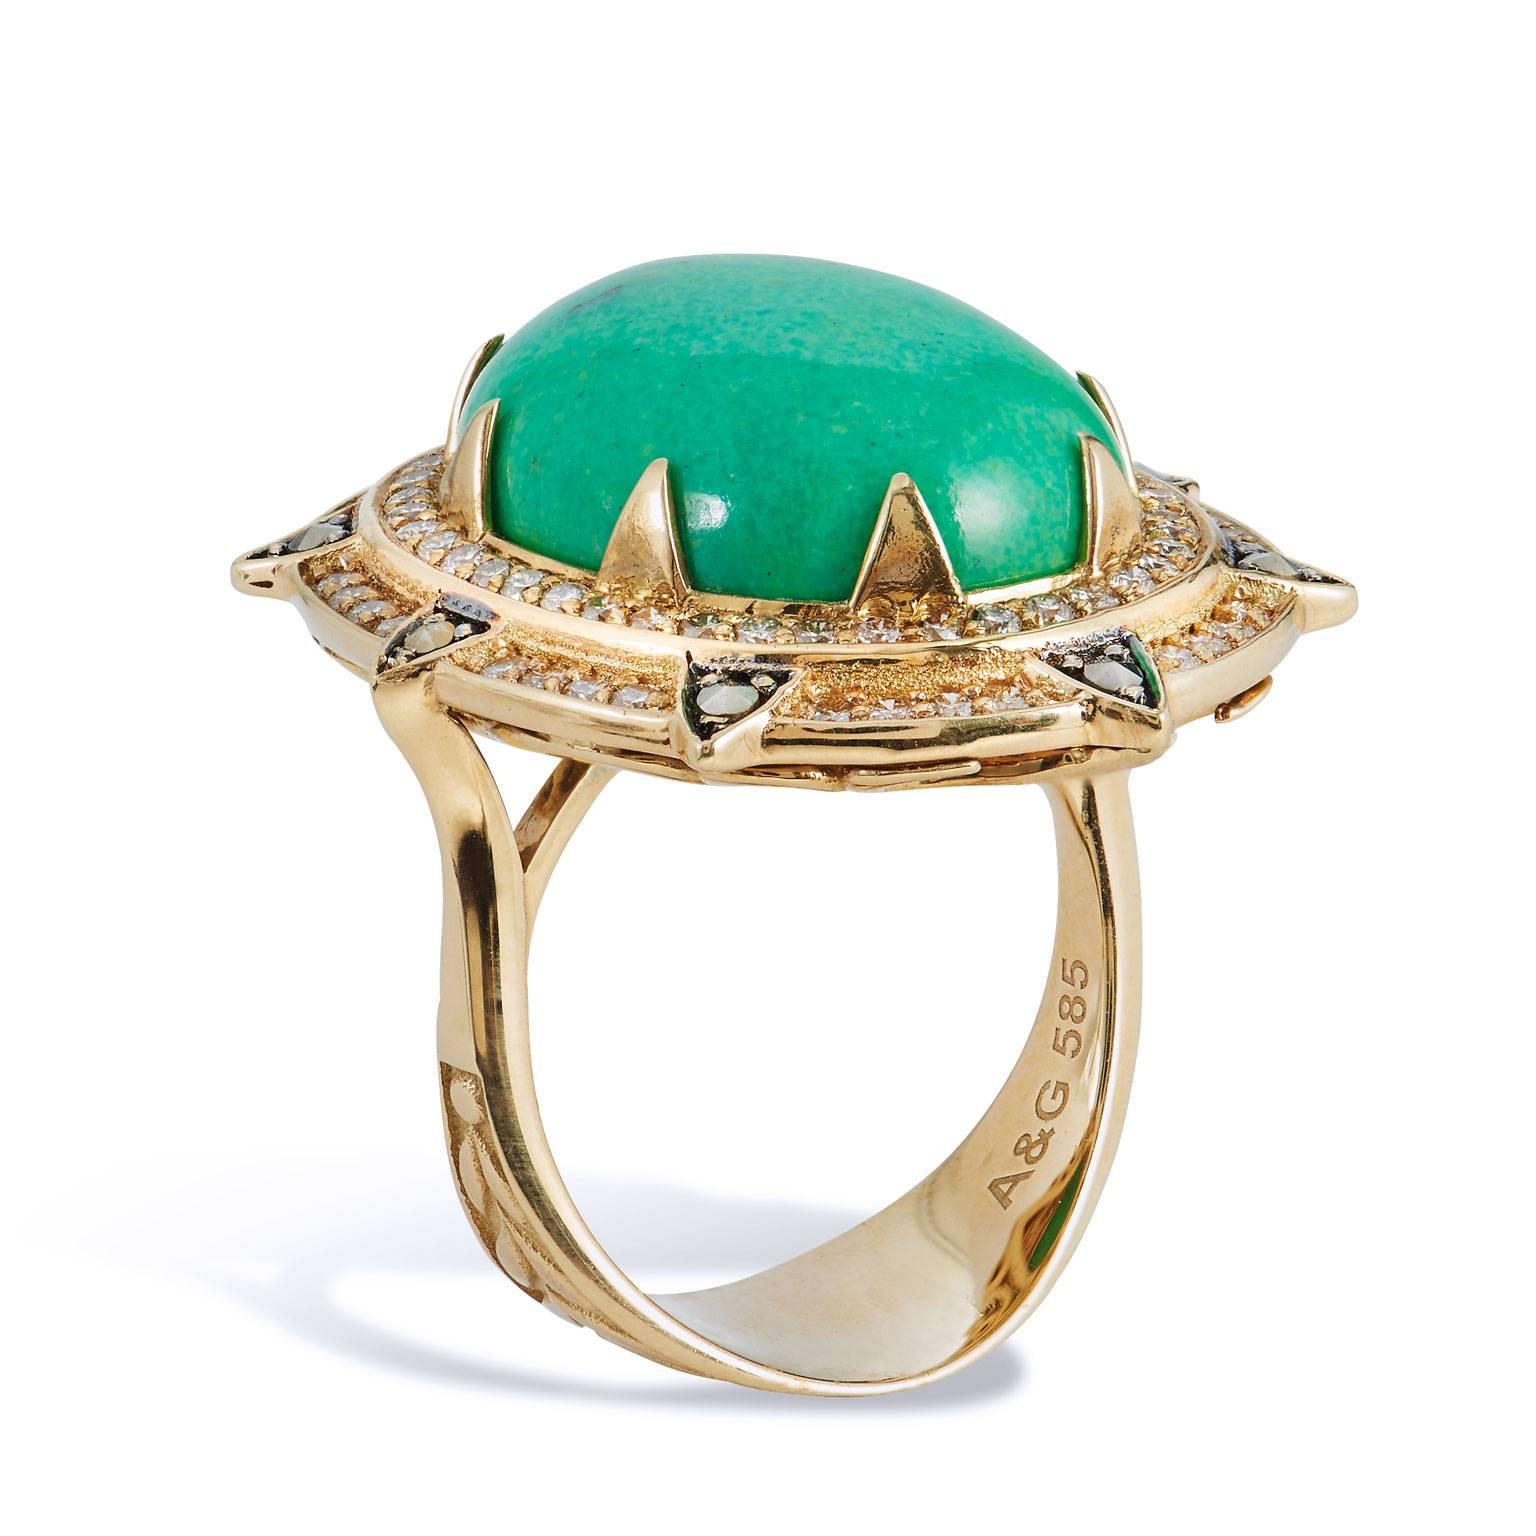 14 karat yellow gold ring featuring a 12.76 carat oval green turquoise measuring 20 millimeter x 15 millimeter. 0.85 carat of brown diamond and 0.18 carat of pyrite further enhance the piece. 